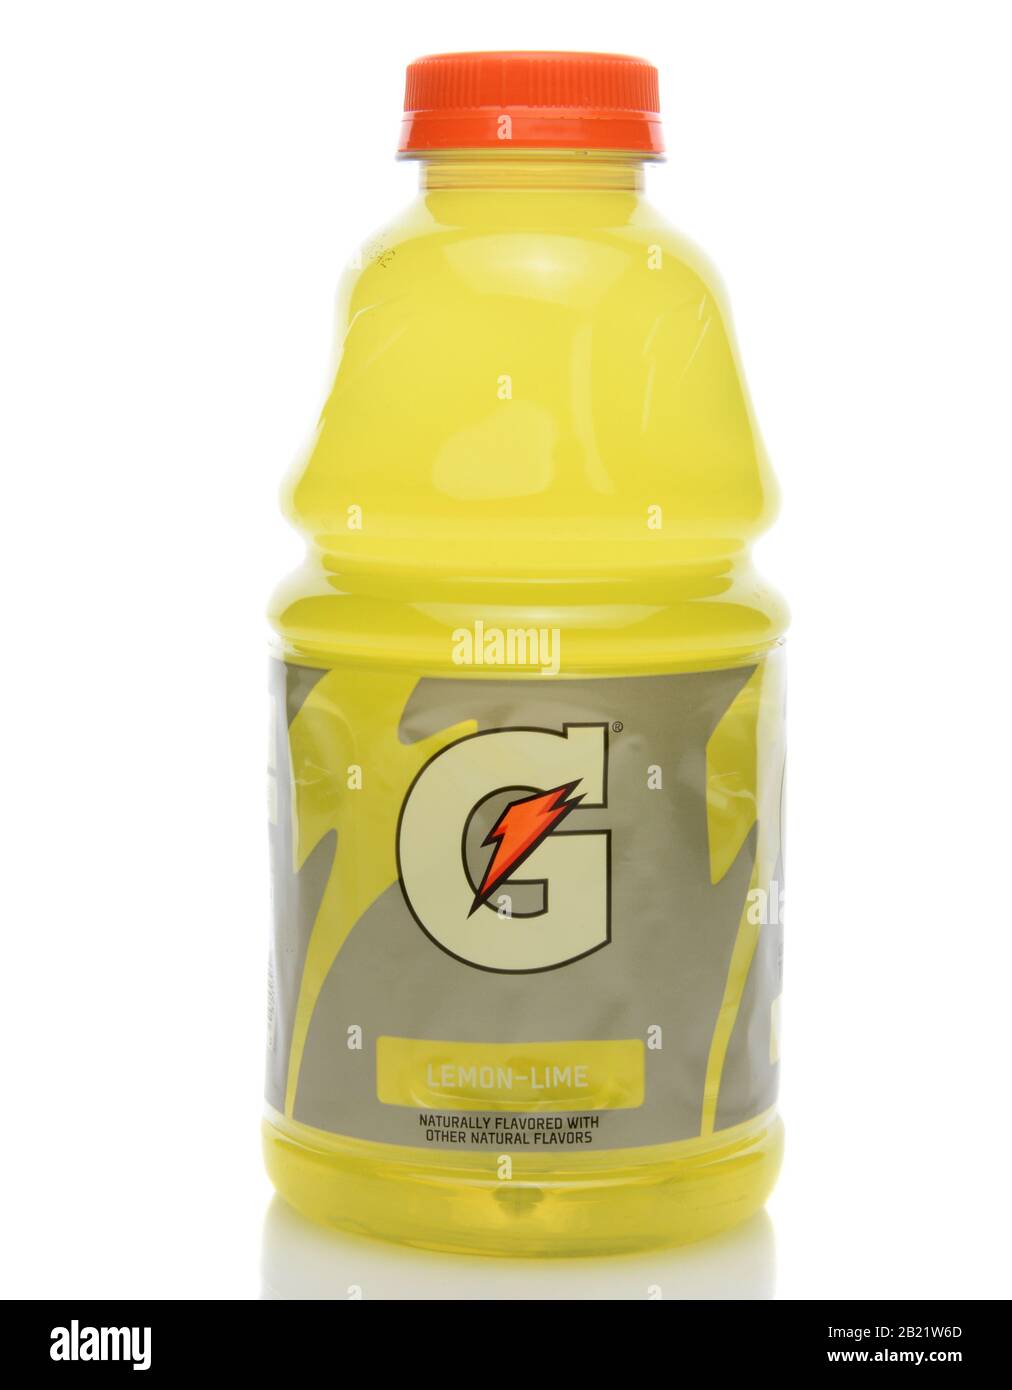 IRVINE, CA - SEPTEMBER 22, 2014: A bottle of Gatorade Lemon Lime Thirst Quencher. The beverage was first developed in 1965 by a team of researchers at Stock Photo